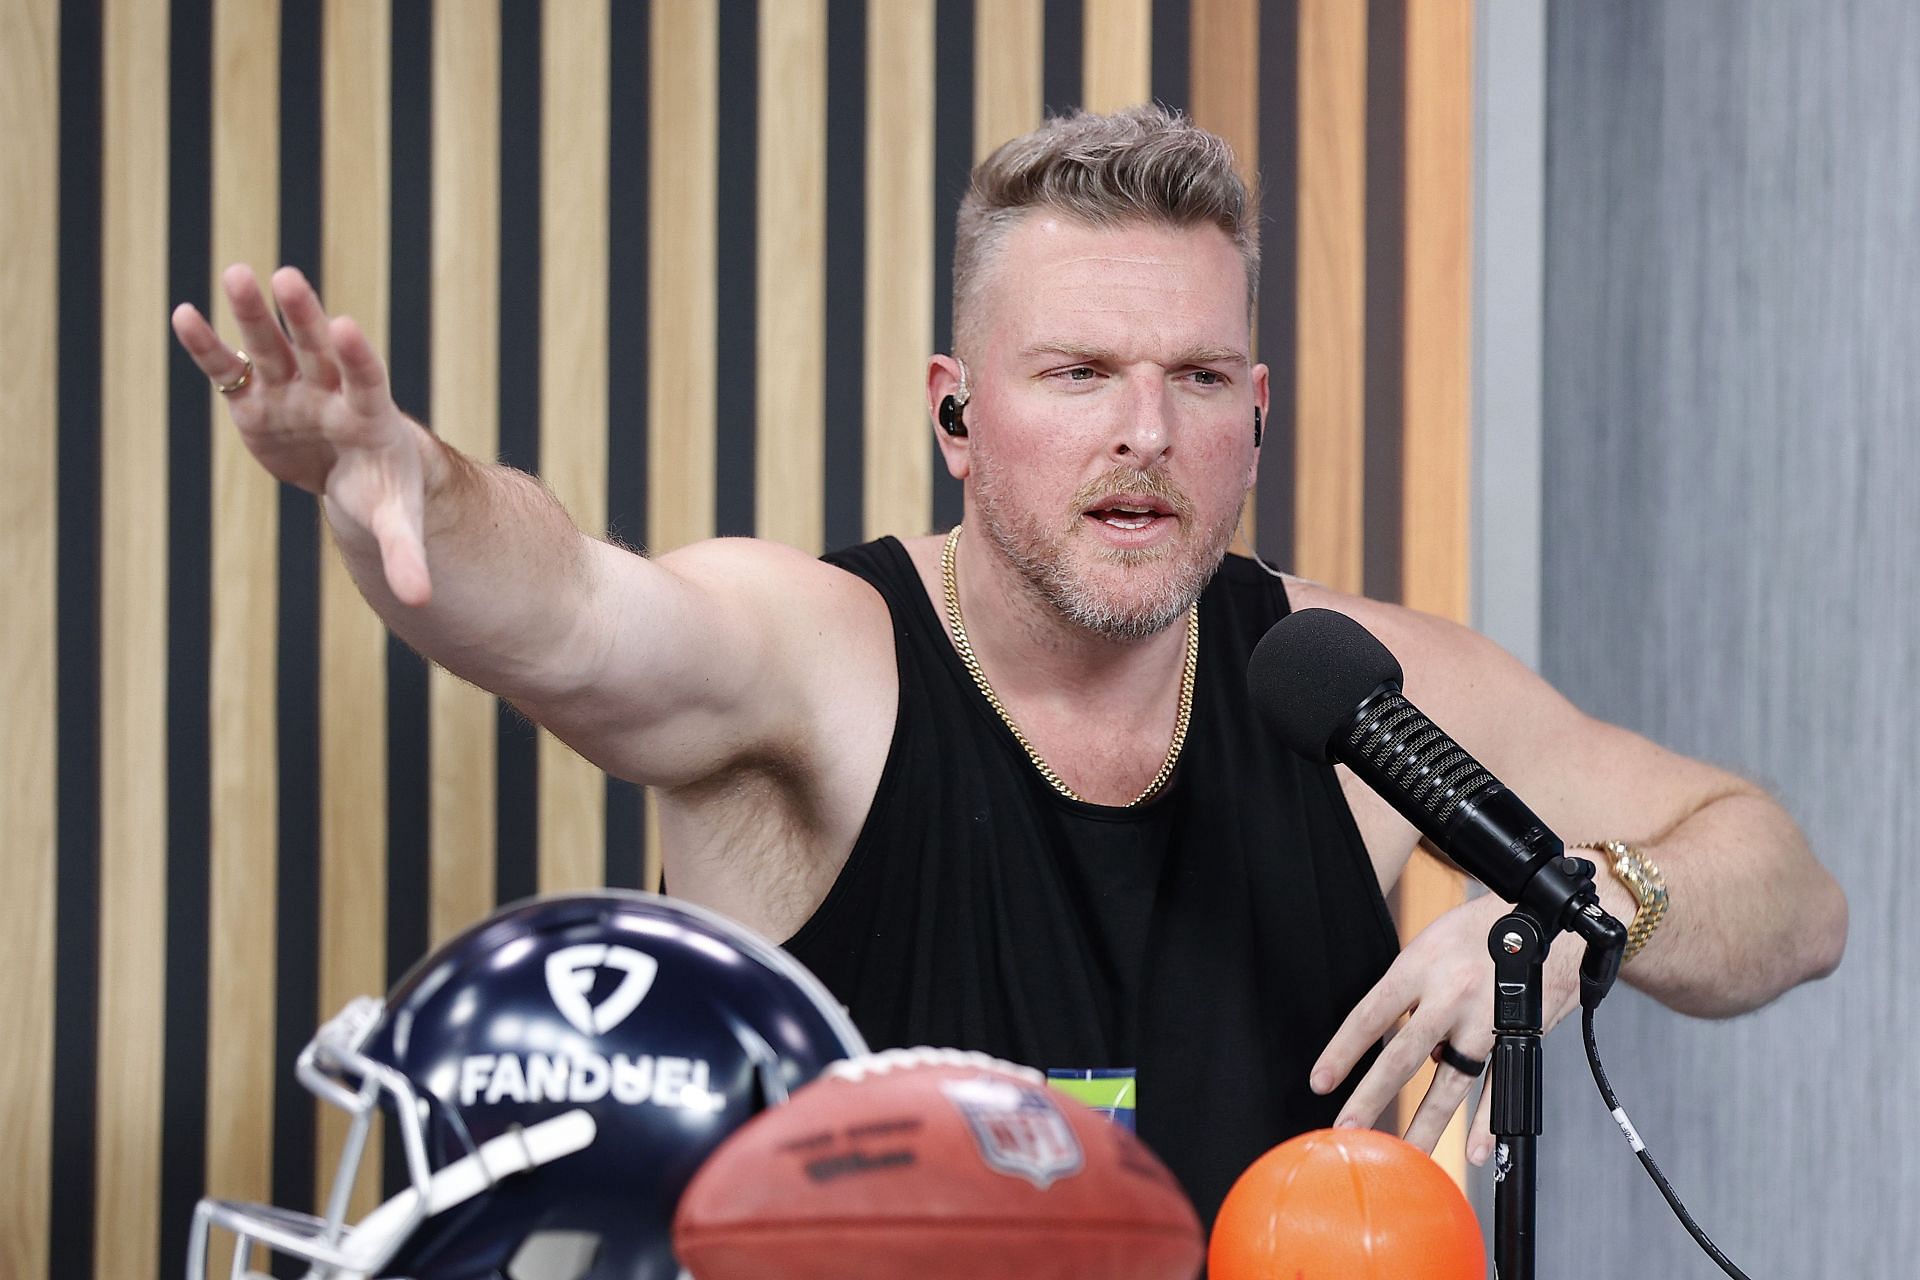 Pat McAfee is taking his popular eponymous show to ESPN - image via Getty